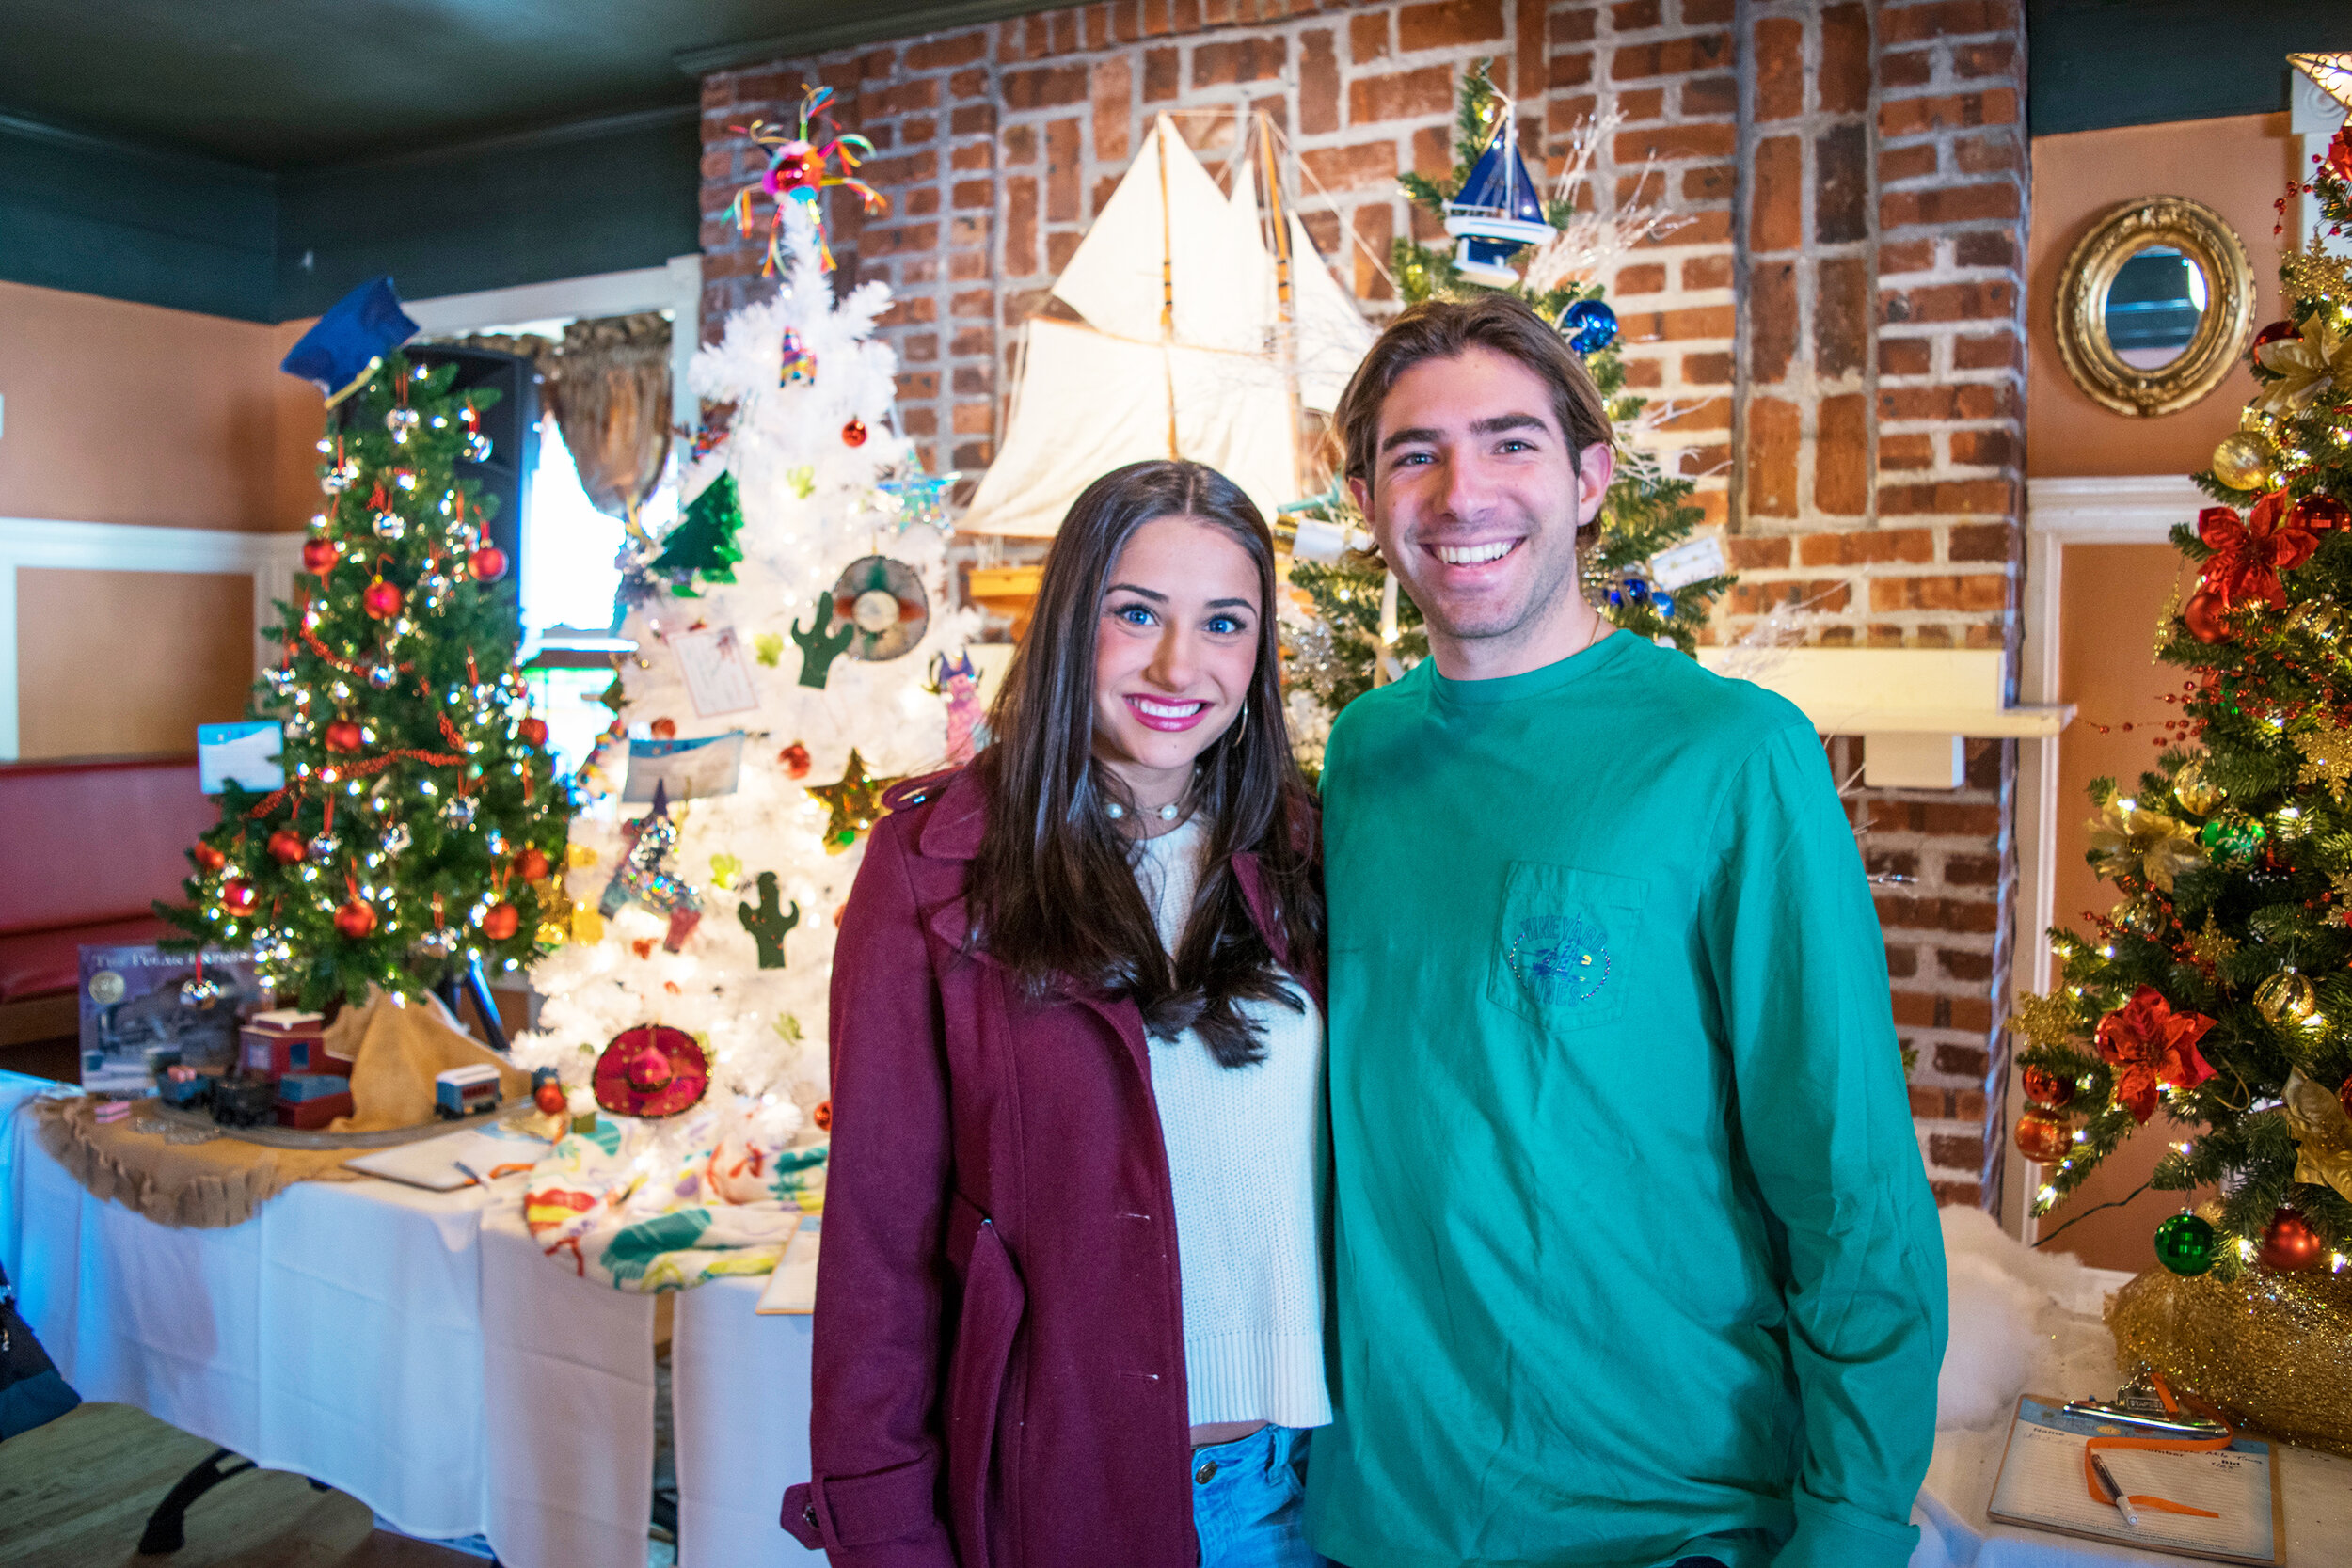 Chloe Schfaeffer and Jack Juska checked out  the trees and wreaths at the Festival of Trees.